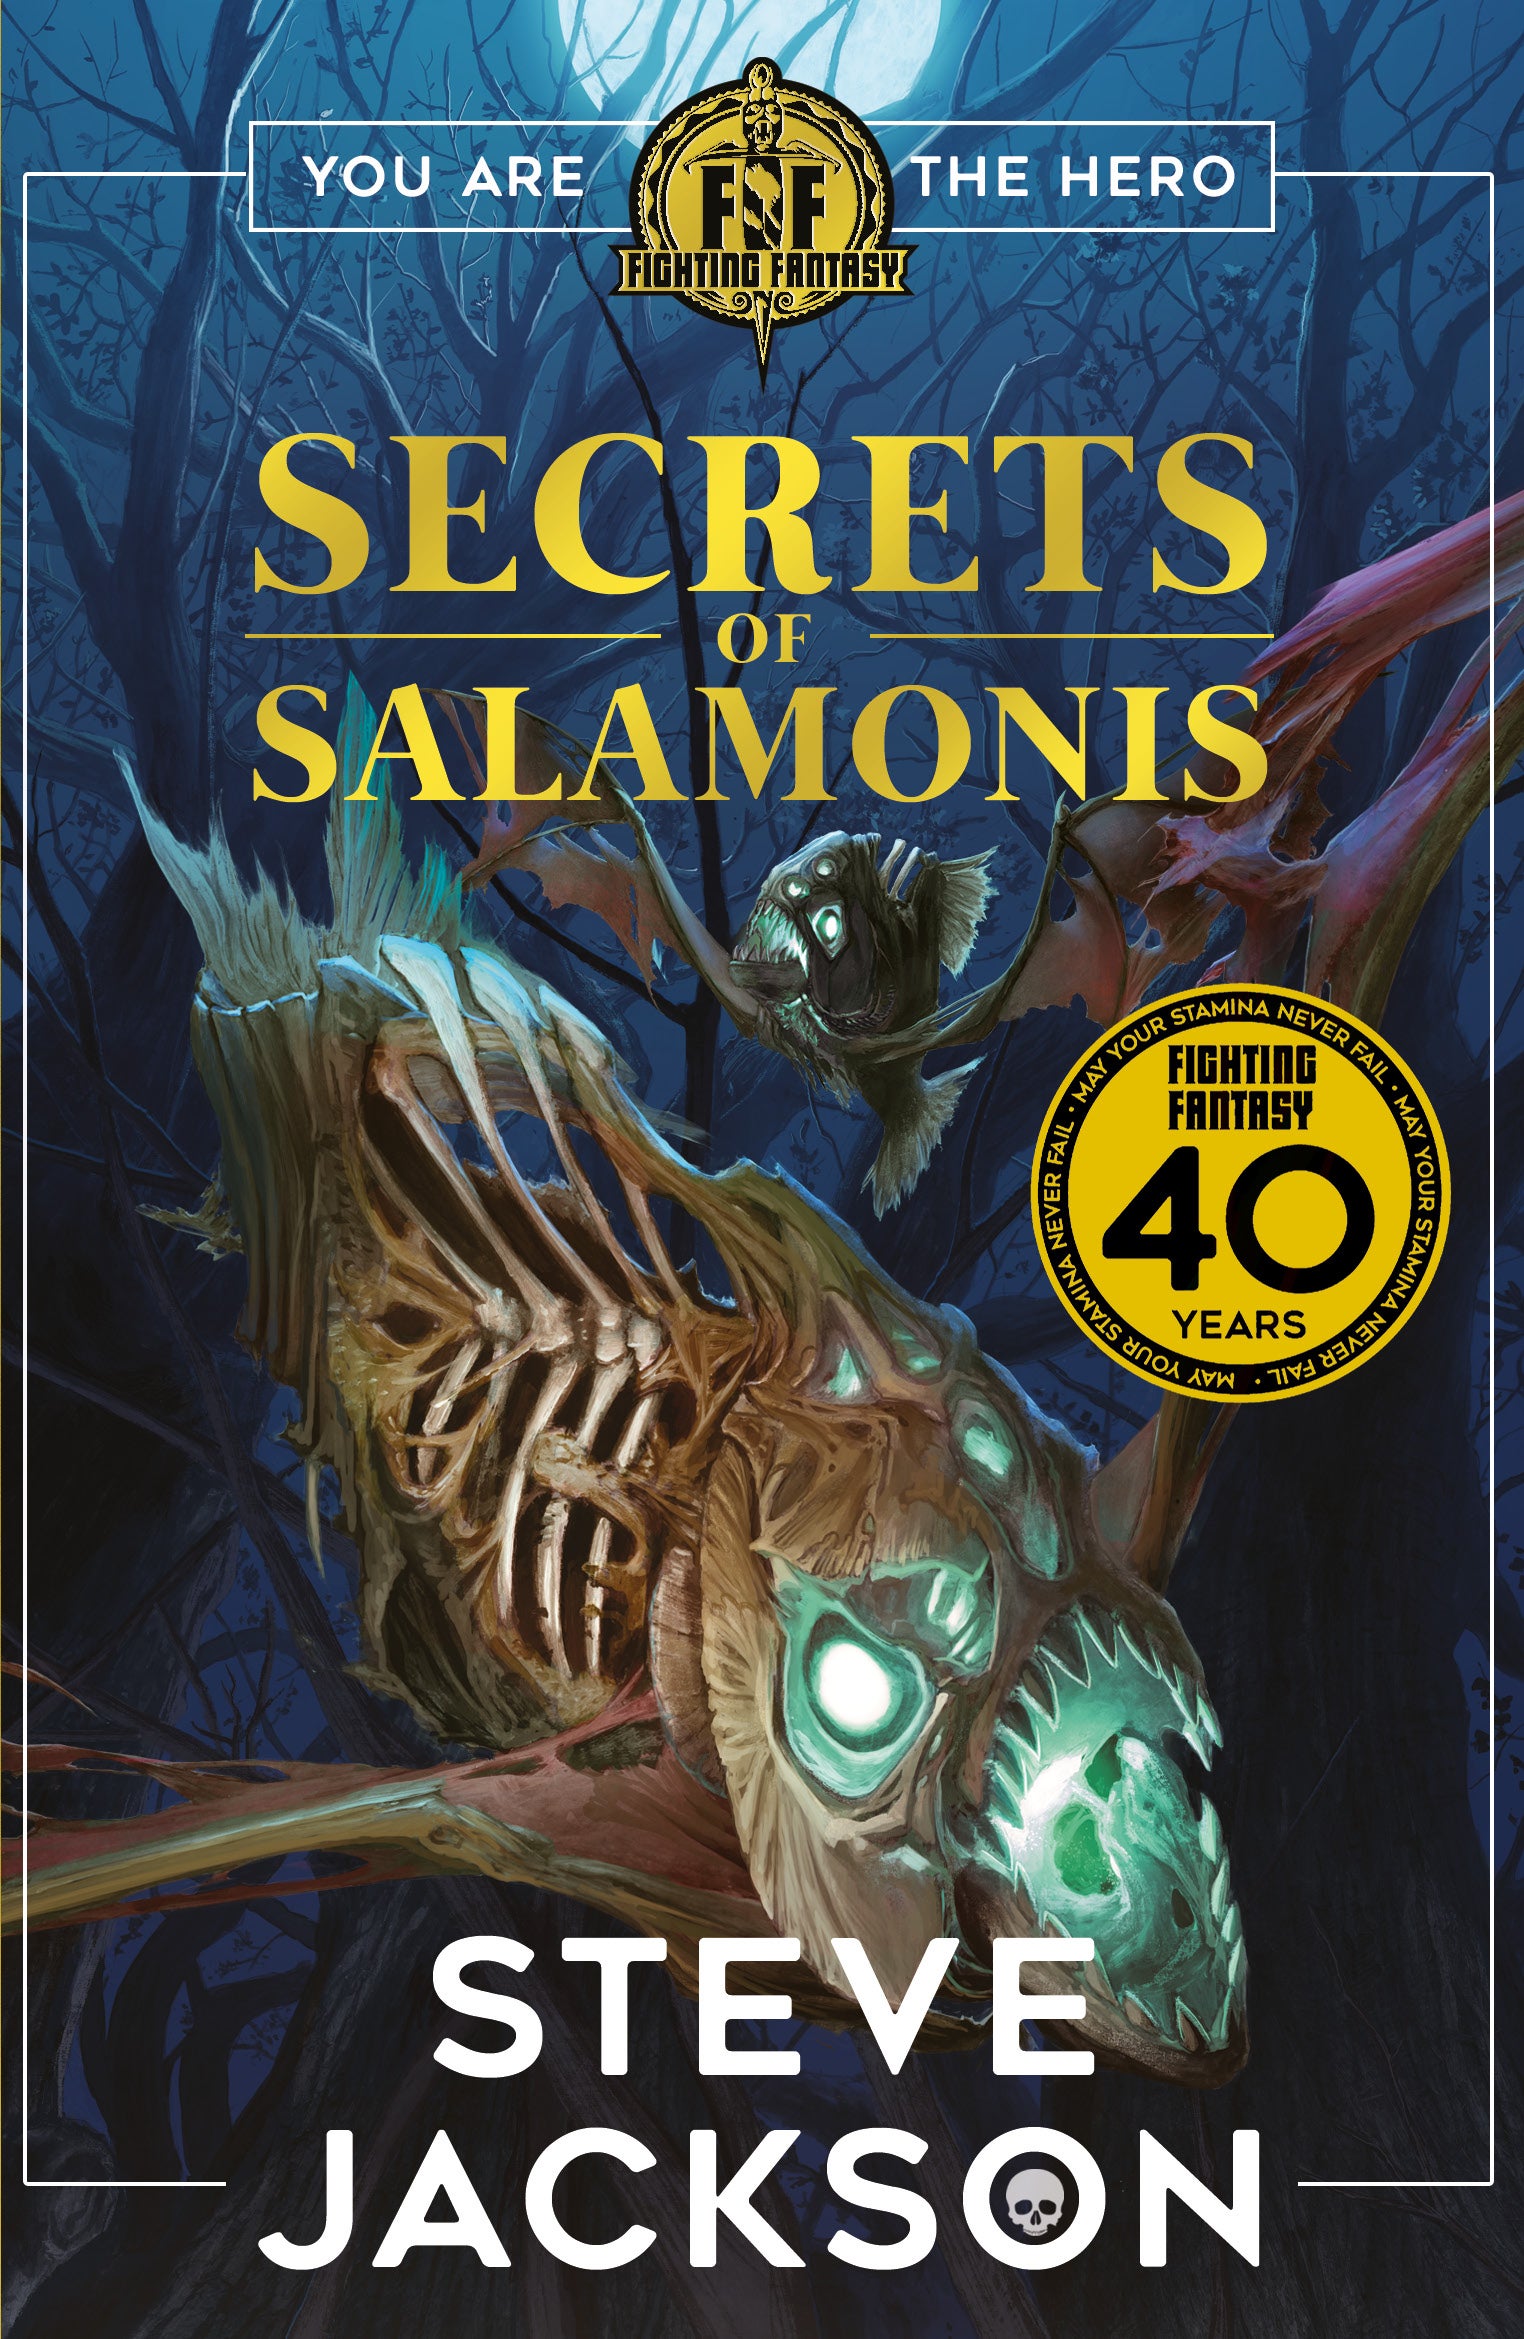 The cover of Steve Jackson's new Fighting Fantasy book, Secrets of Salamonis. A magical, skeletal fish swims across the cover.